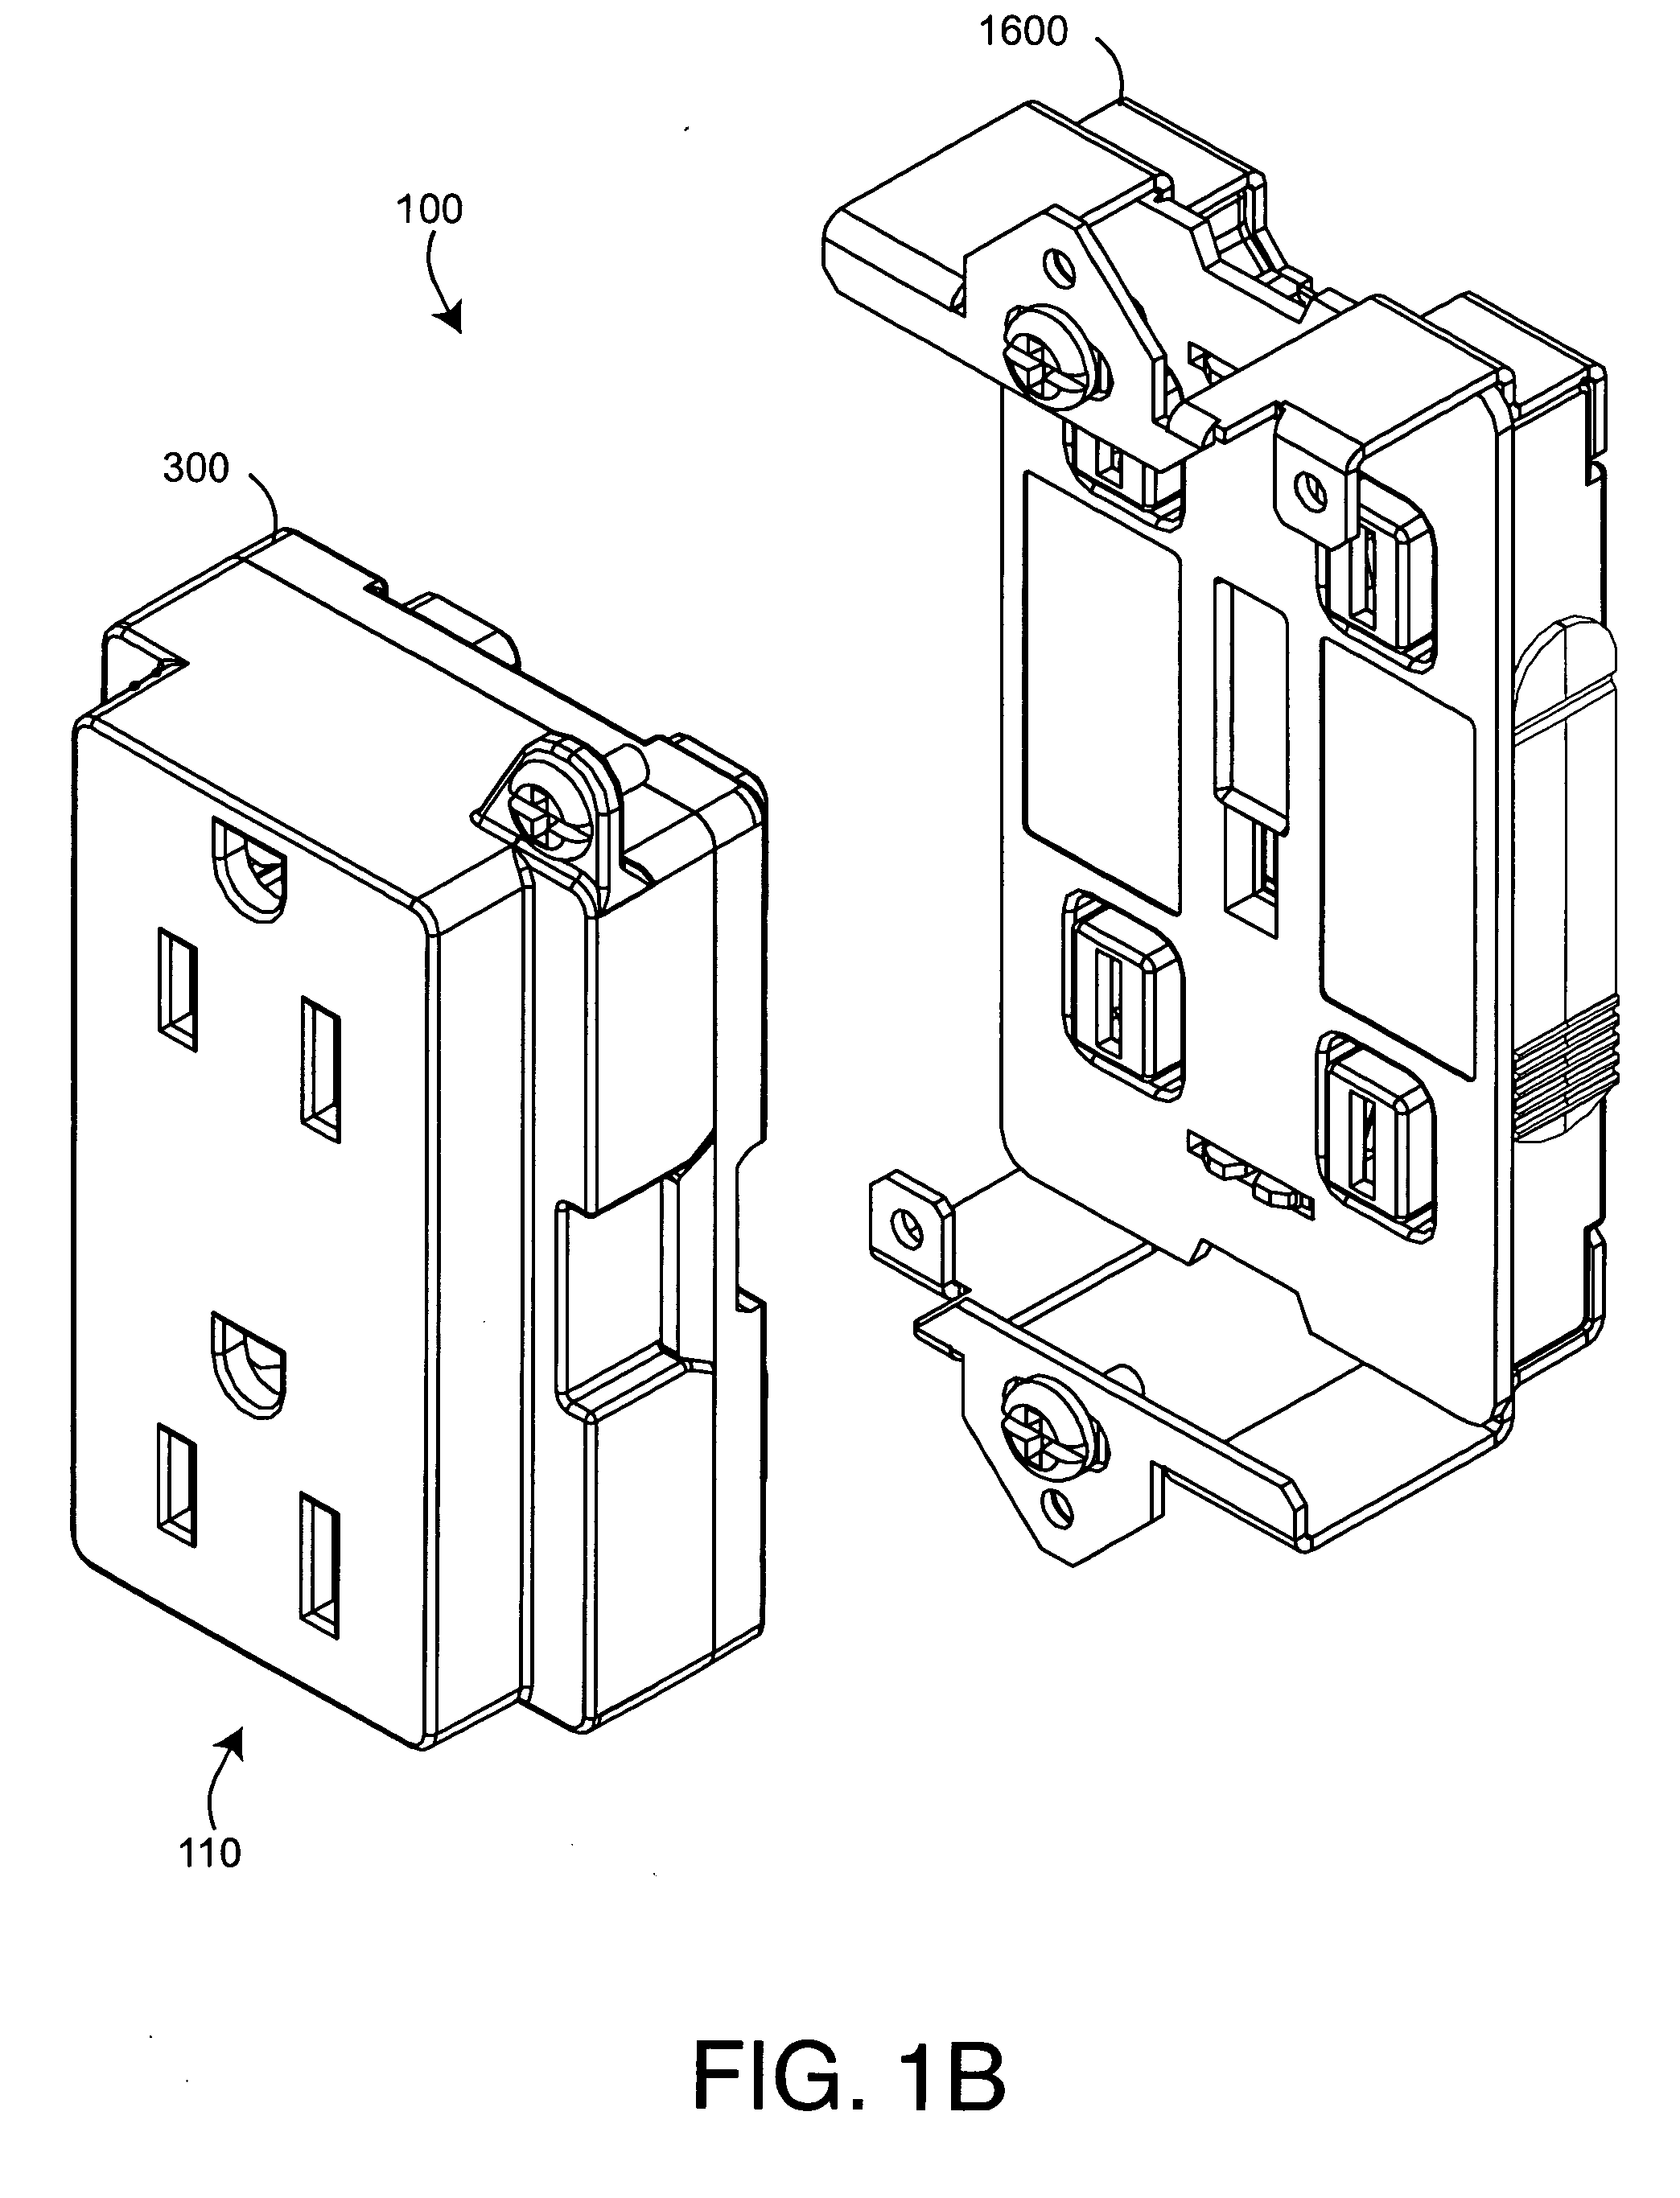 Safety module electrical distribution system